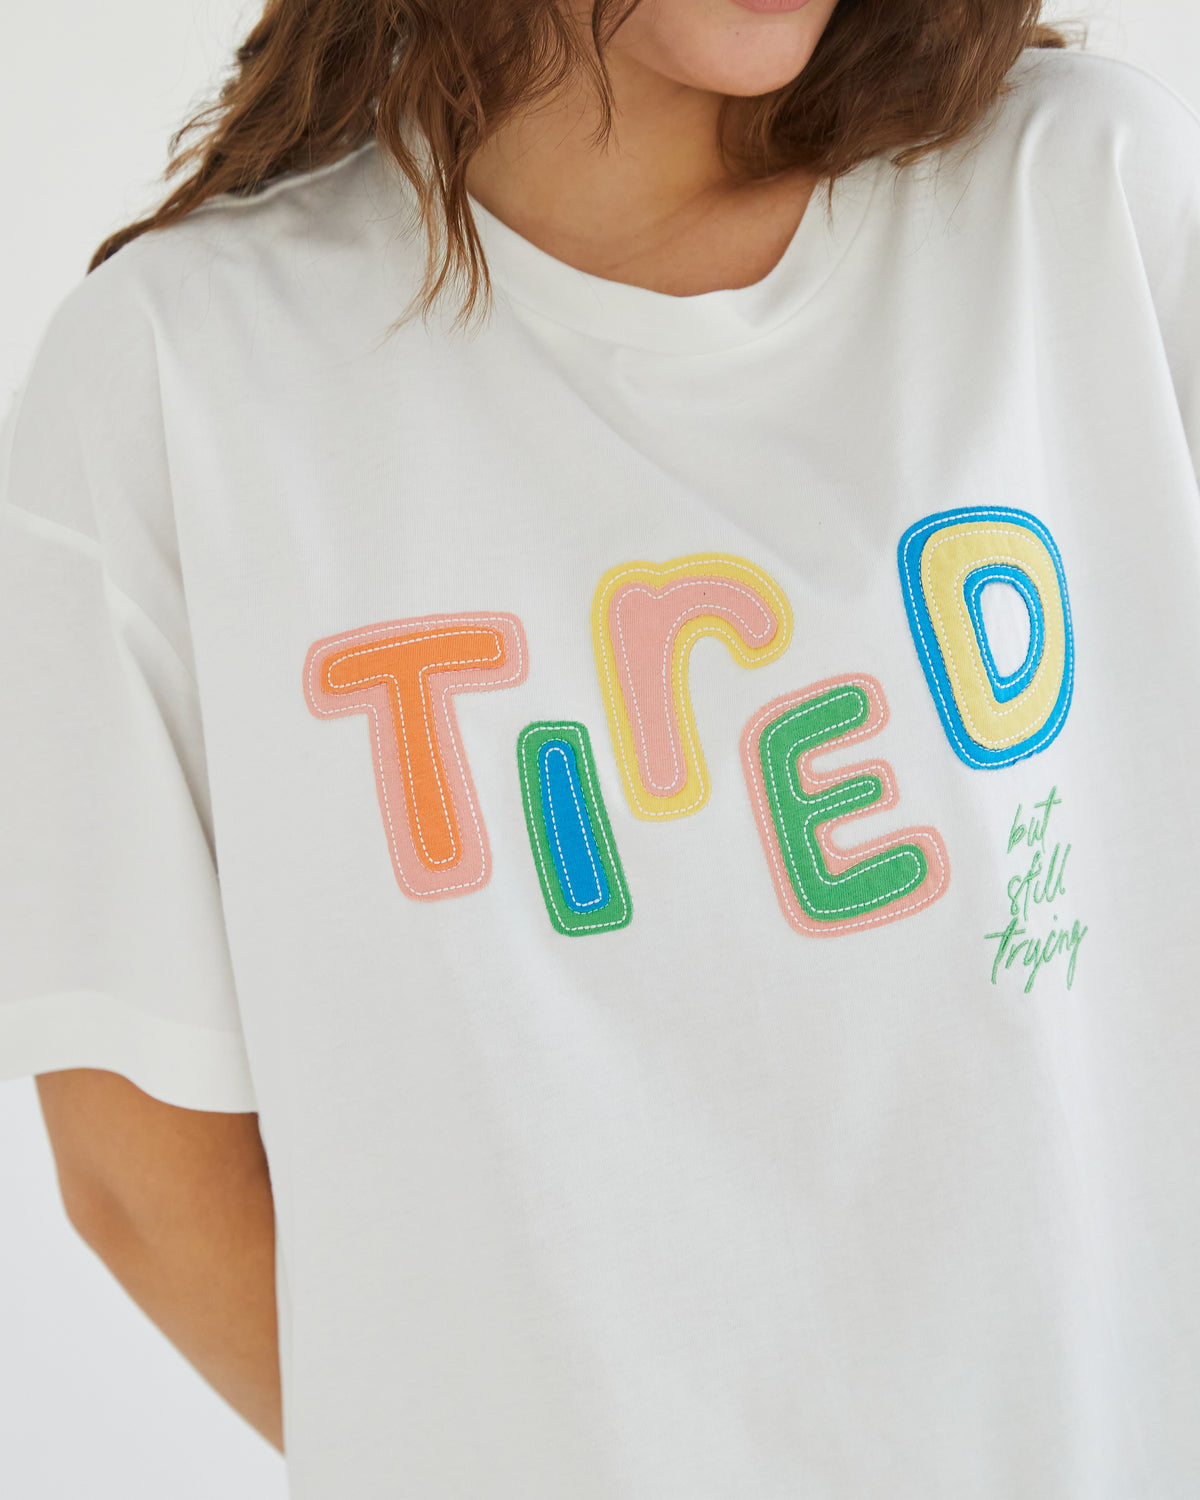 Tired (But Still Trying) T-Shirt